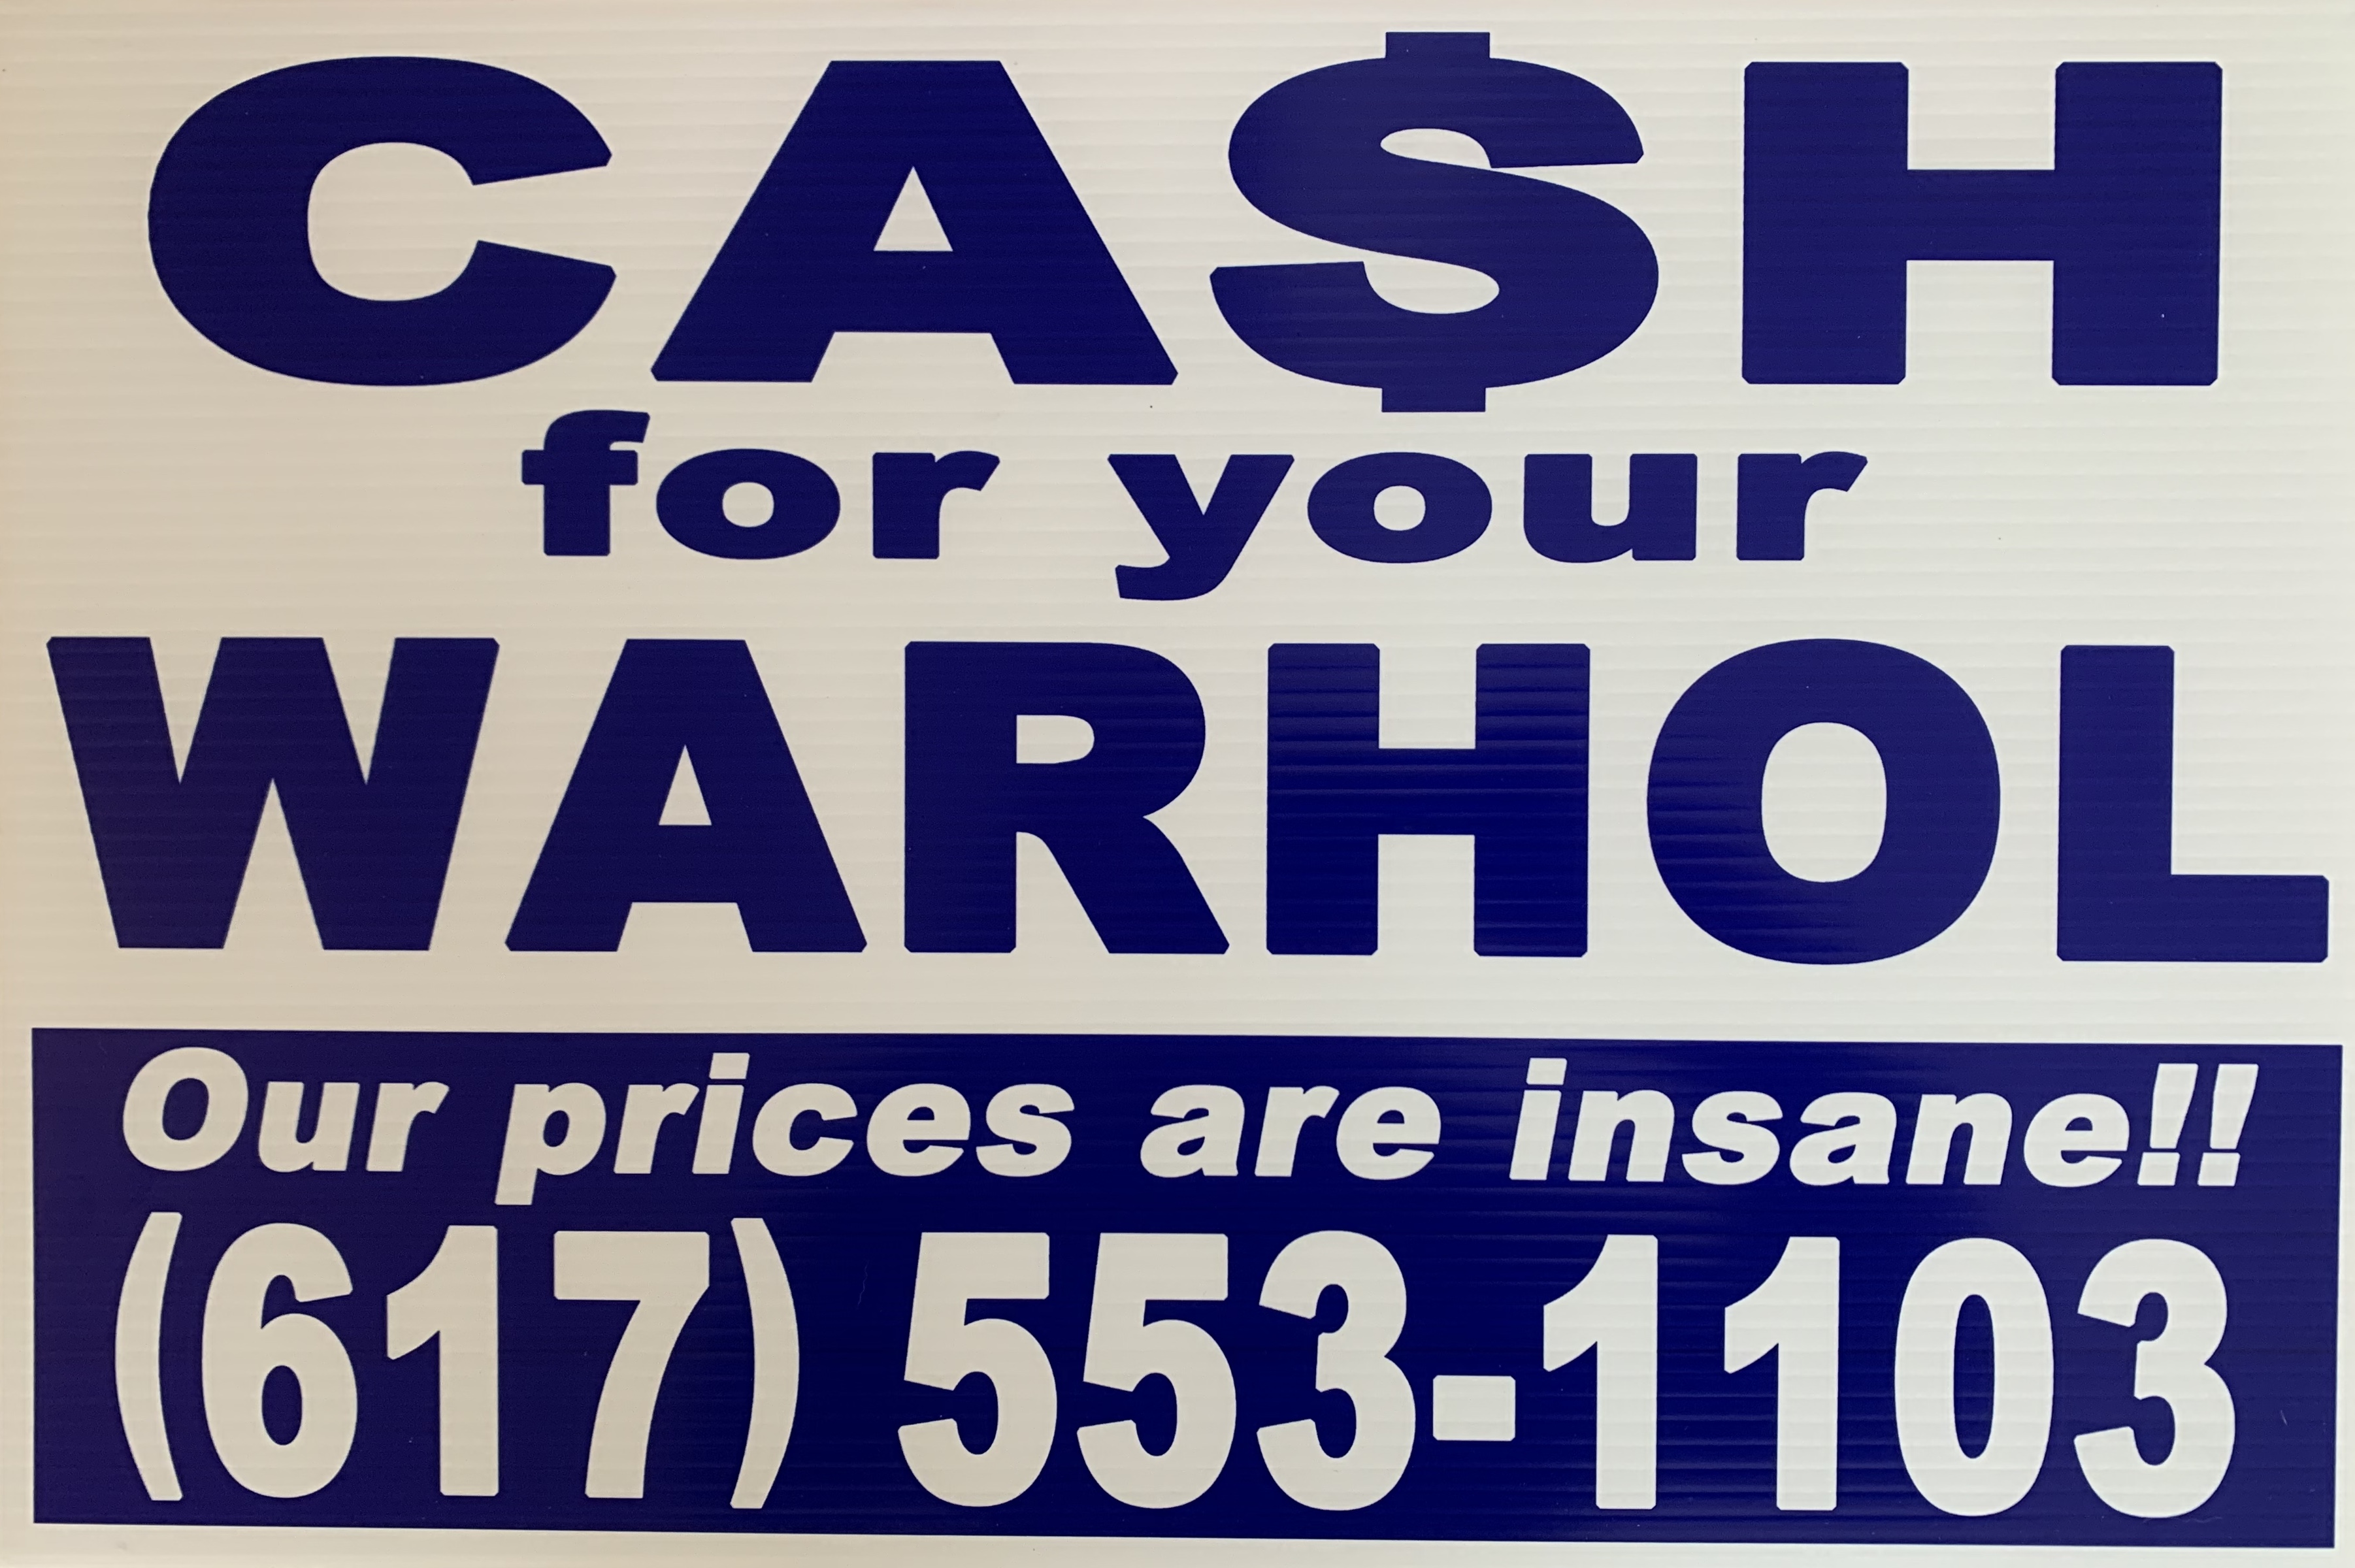 (CASH FOR YOUR WARHOL). Cash For Your Warhol, dba Geoff Hargadon - CASH FOR YOUR WARHOL ARTWORK: OUR PRICES ARE INSANE!! - FROM THE LIMITED GALLERY EDITION OF TEN EXAMPLES ONLY